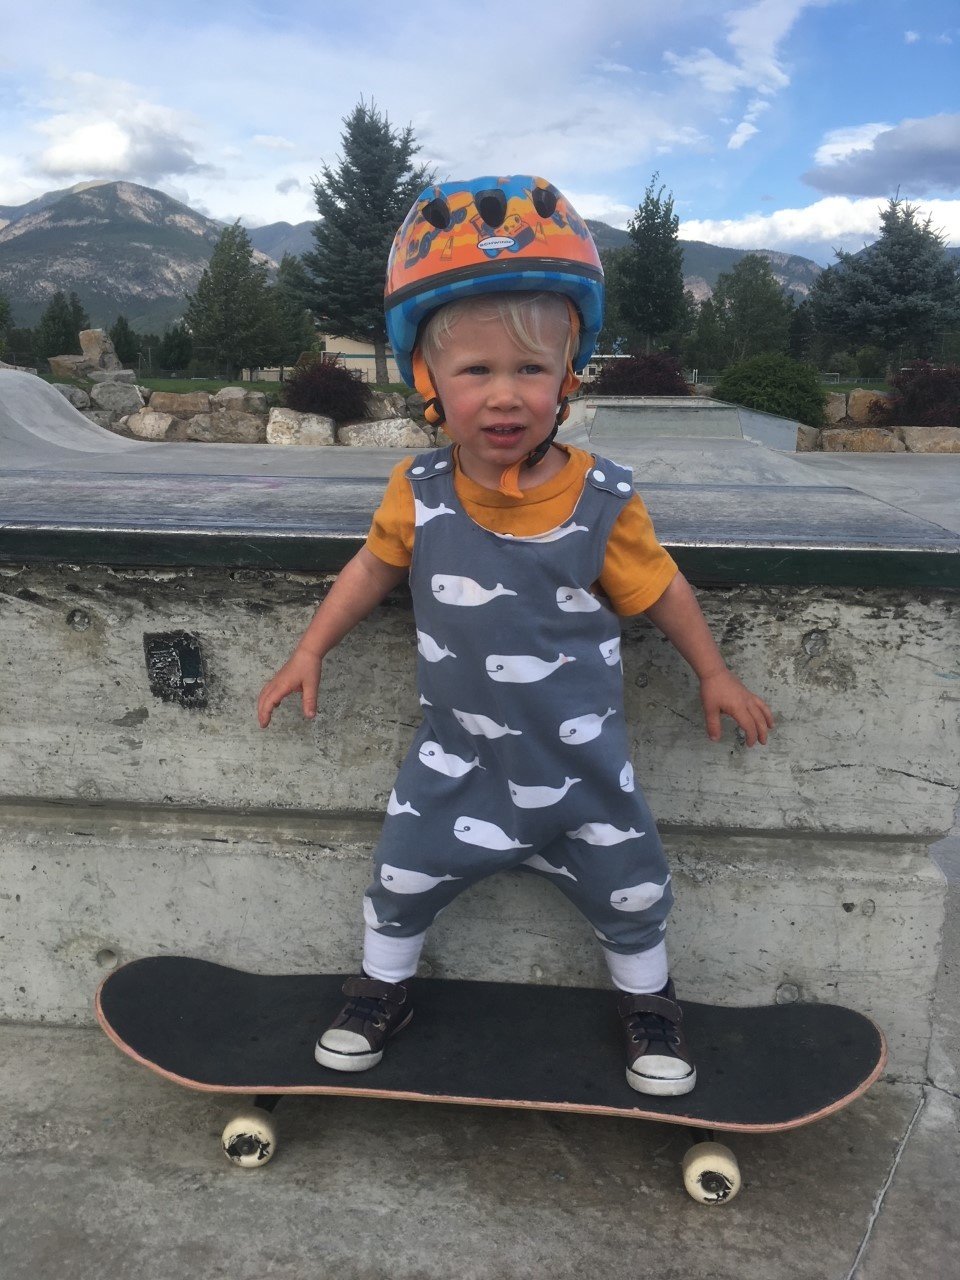 The best skateboards for kids and beginners 